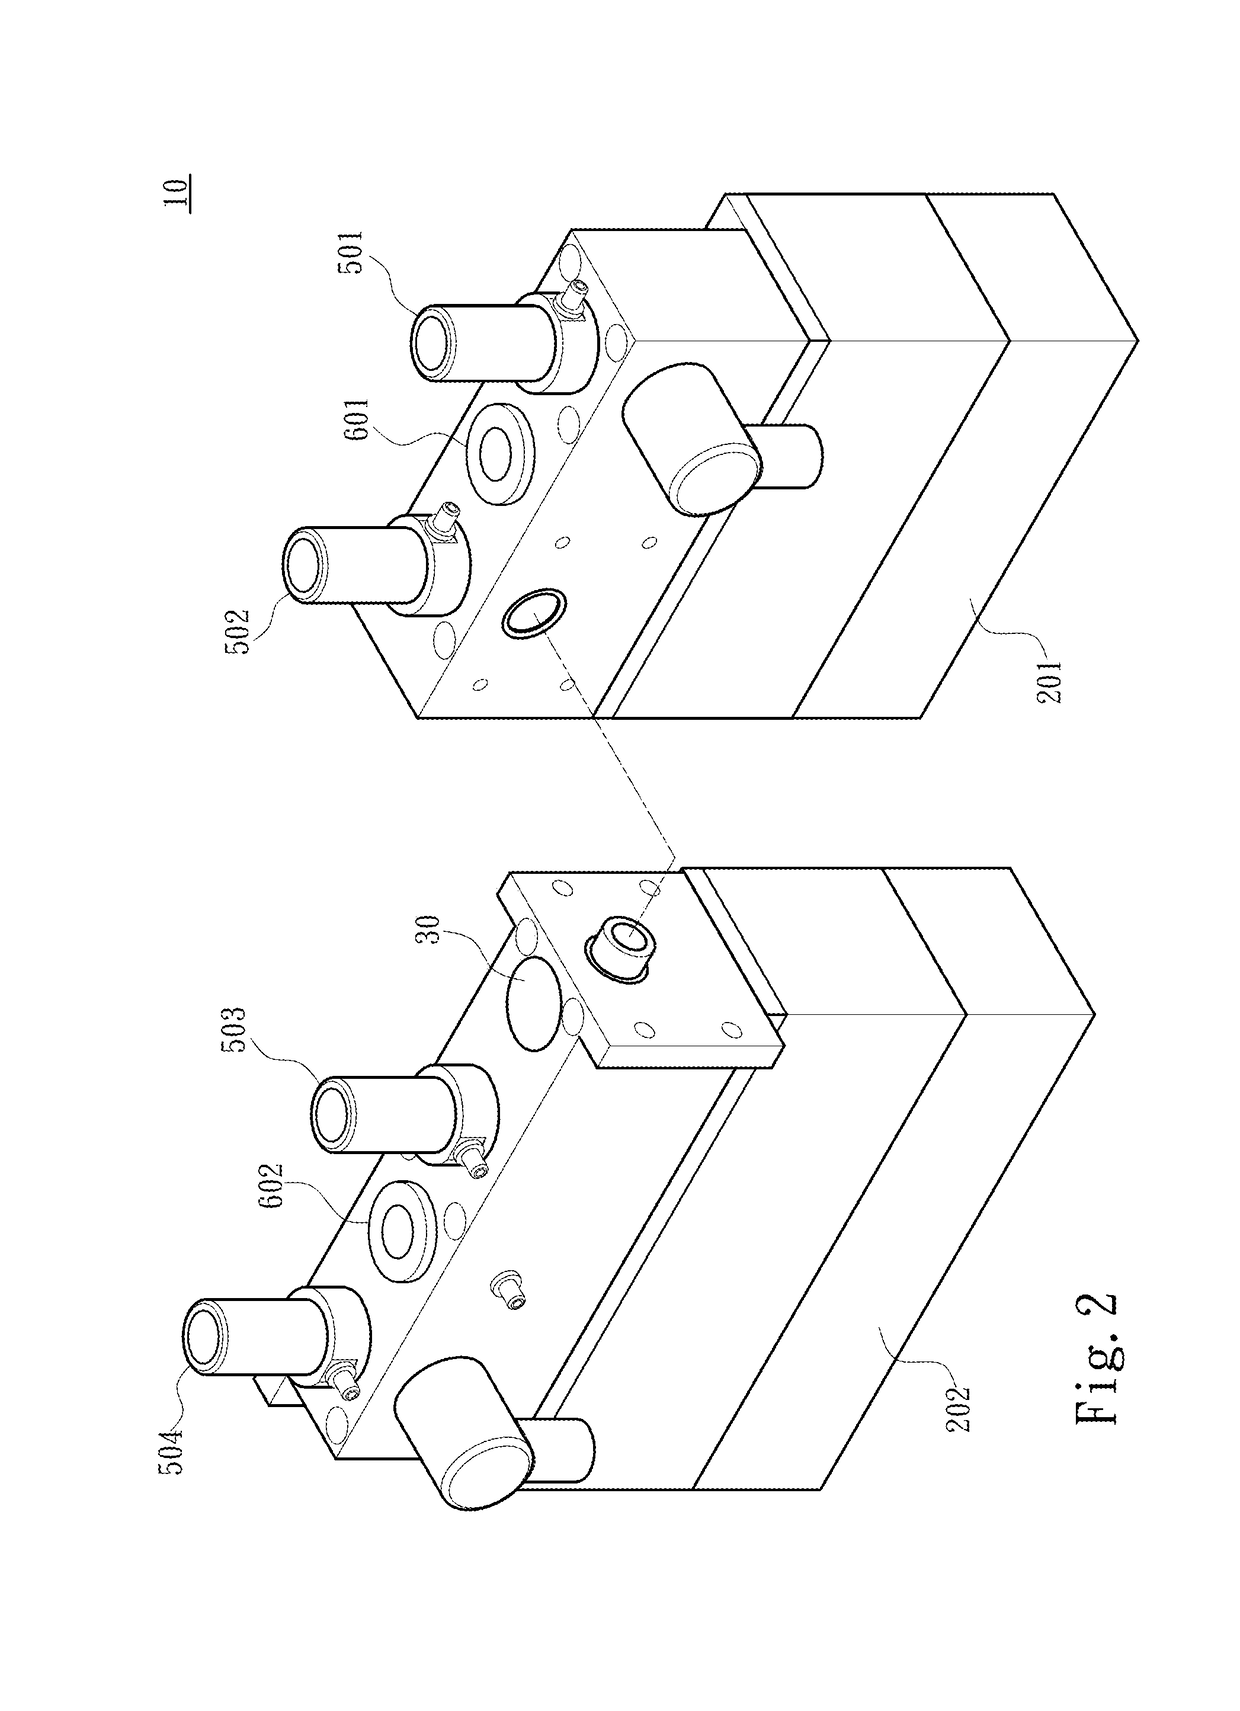 Inflation valve seat with adjustable flow